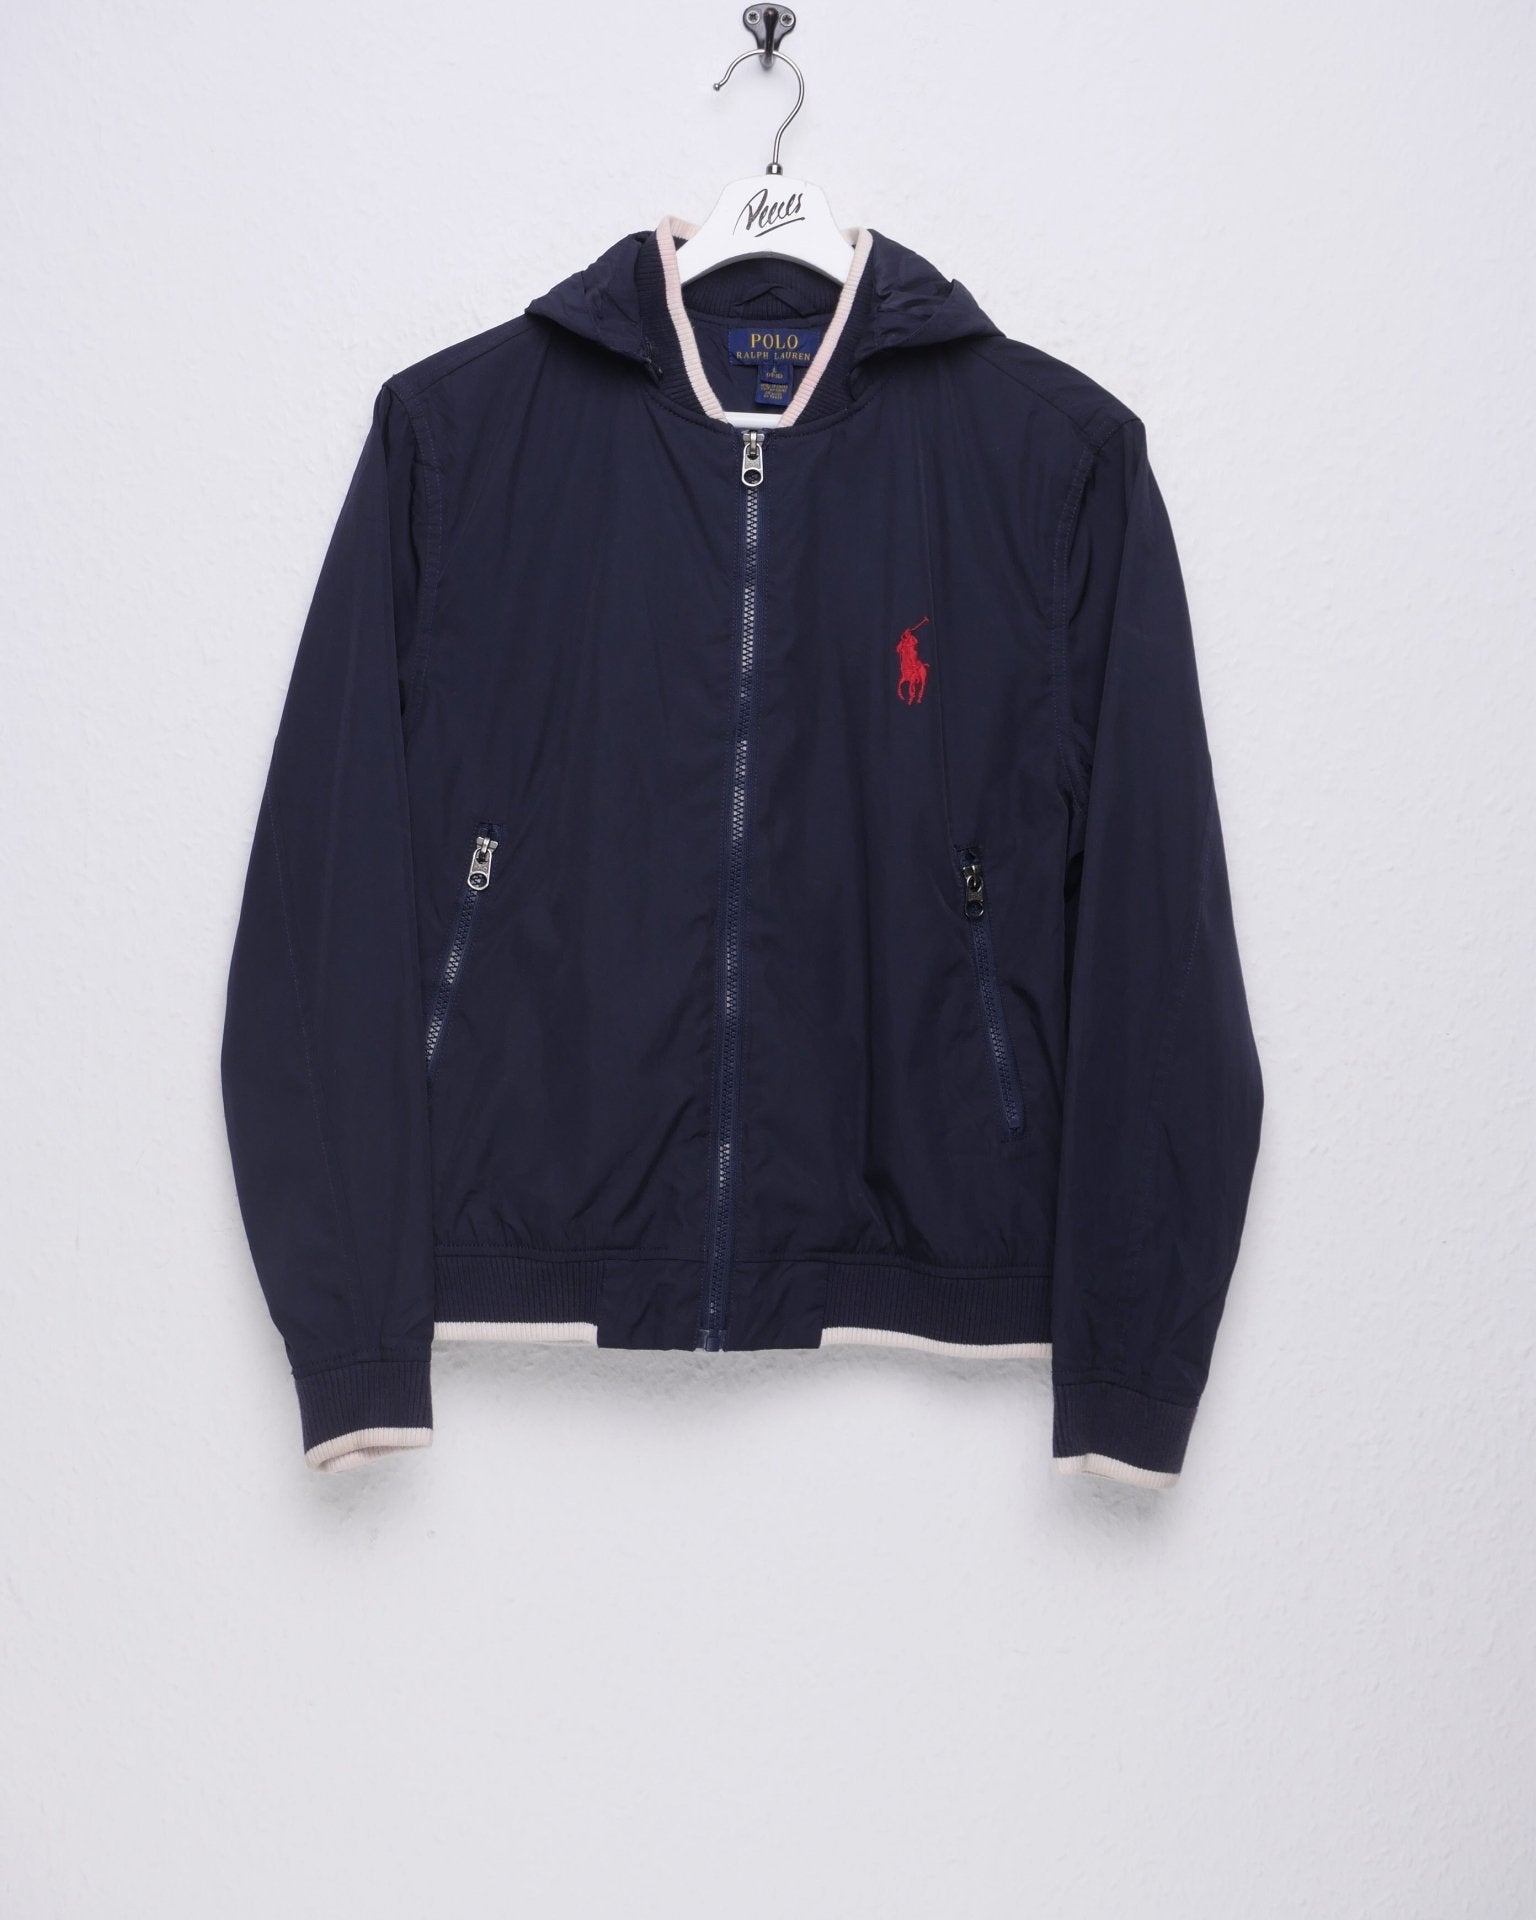 Polo Ralph Lauren embroidered red Big Logo navy Track Jacke - Peeces